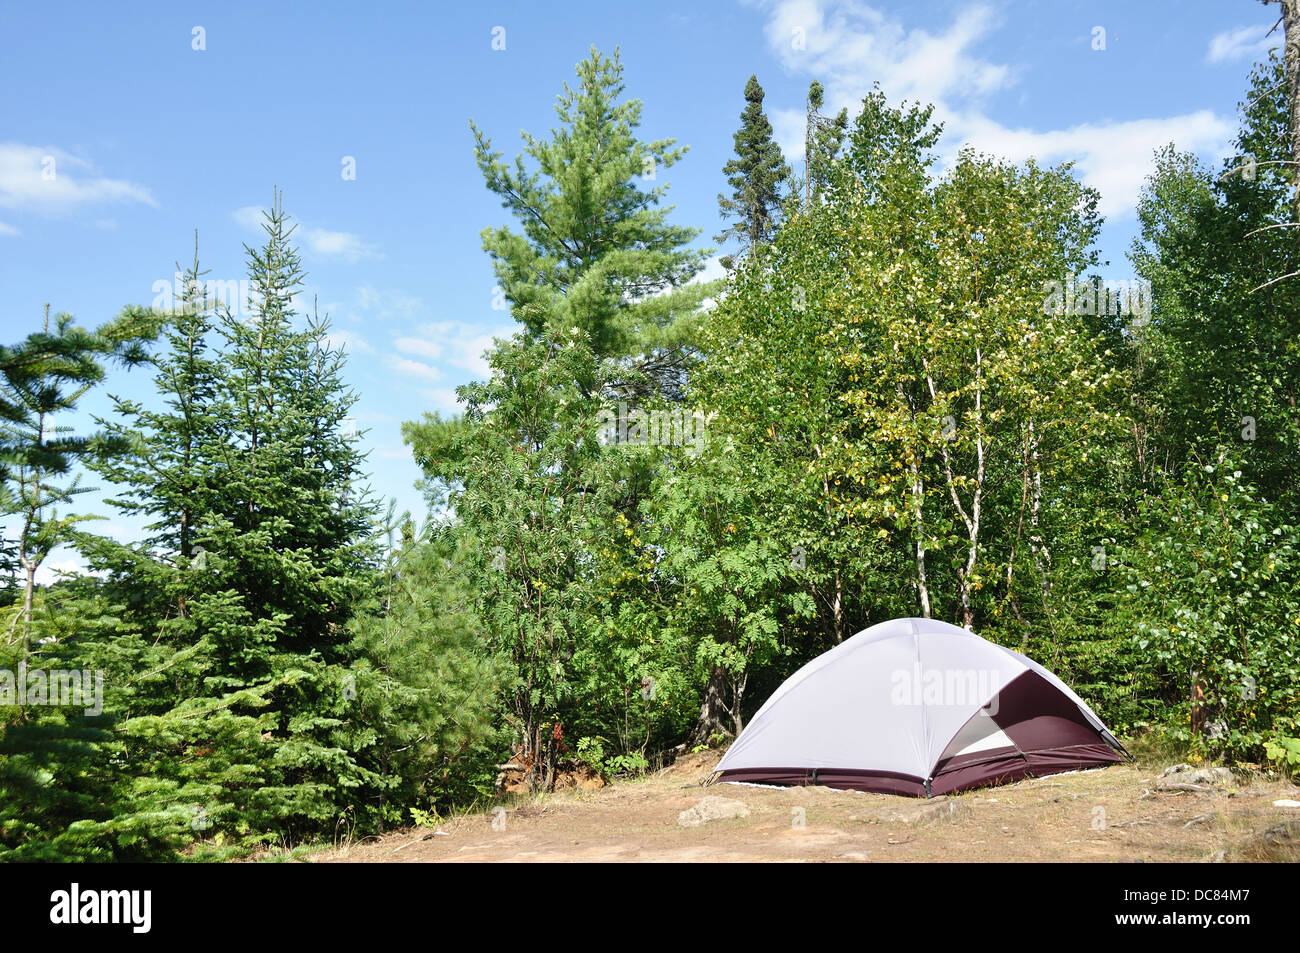 Tent in a woodland camping grounds, Minnesota, USA Stock Photo